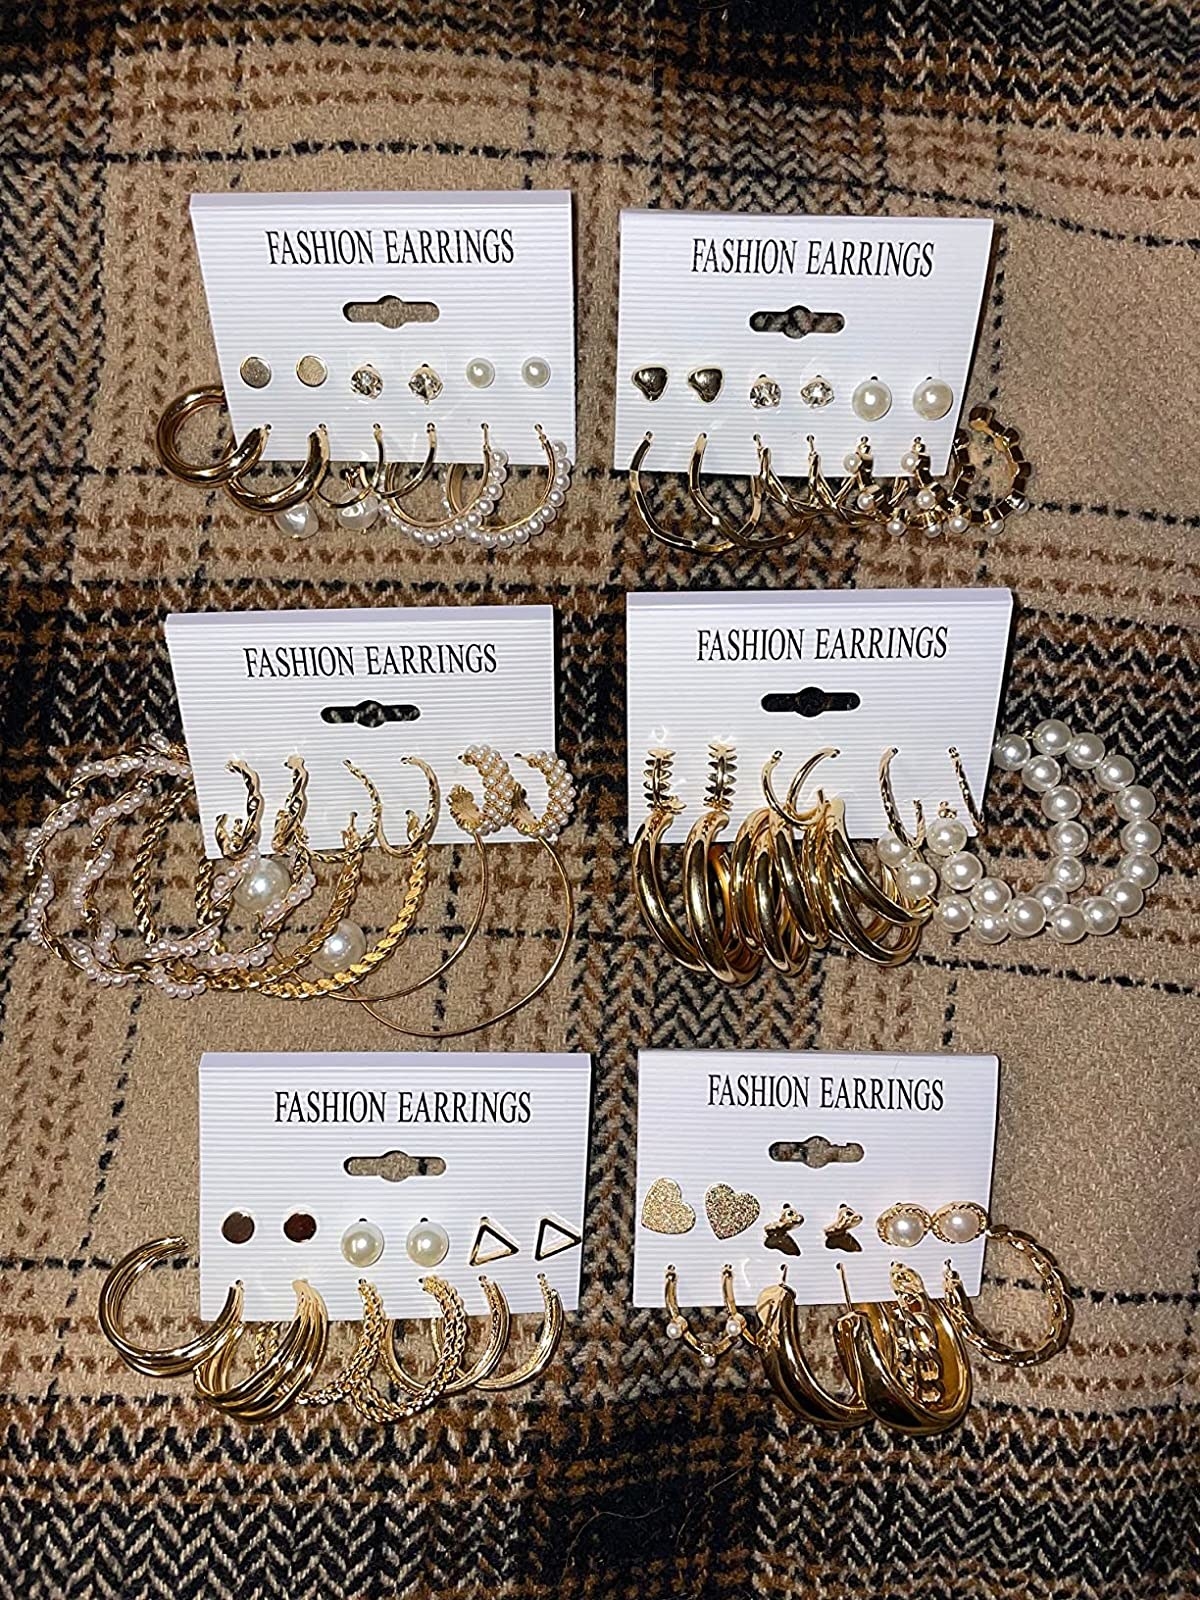 Reviewer image showing all the pairs of earrings